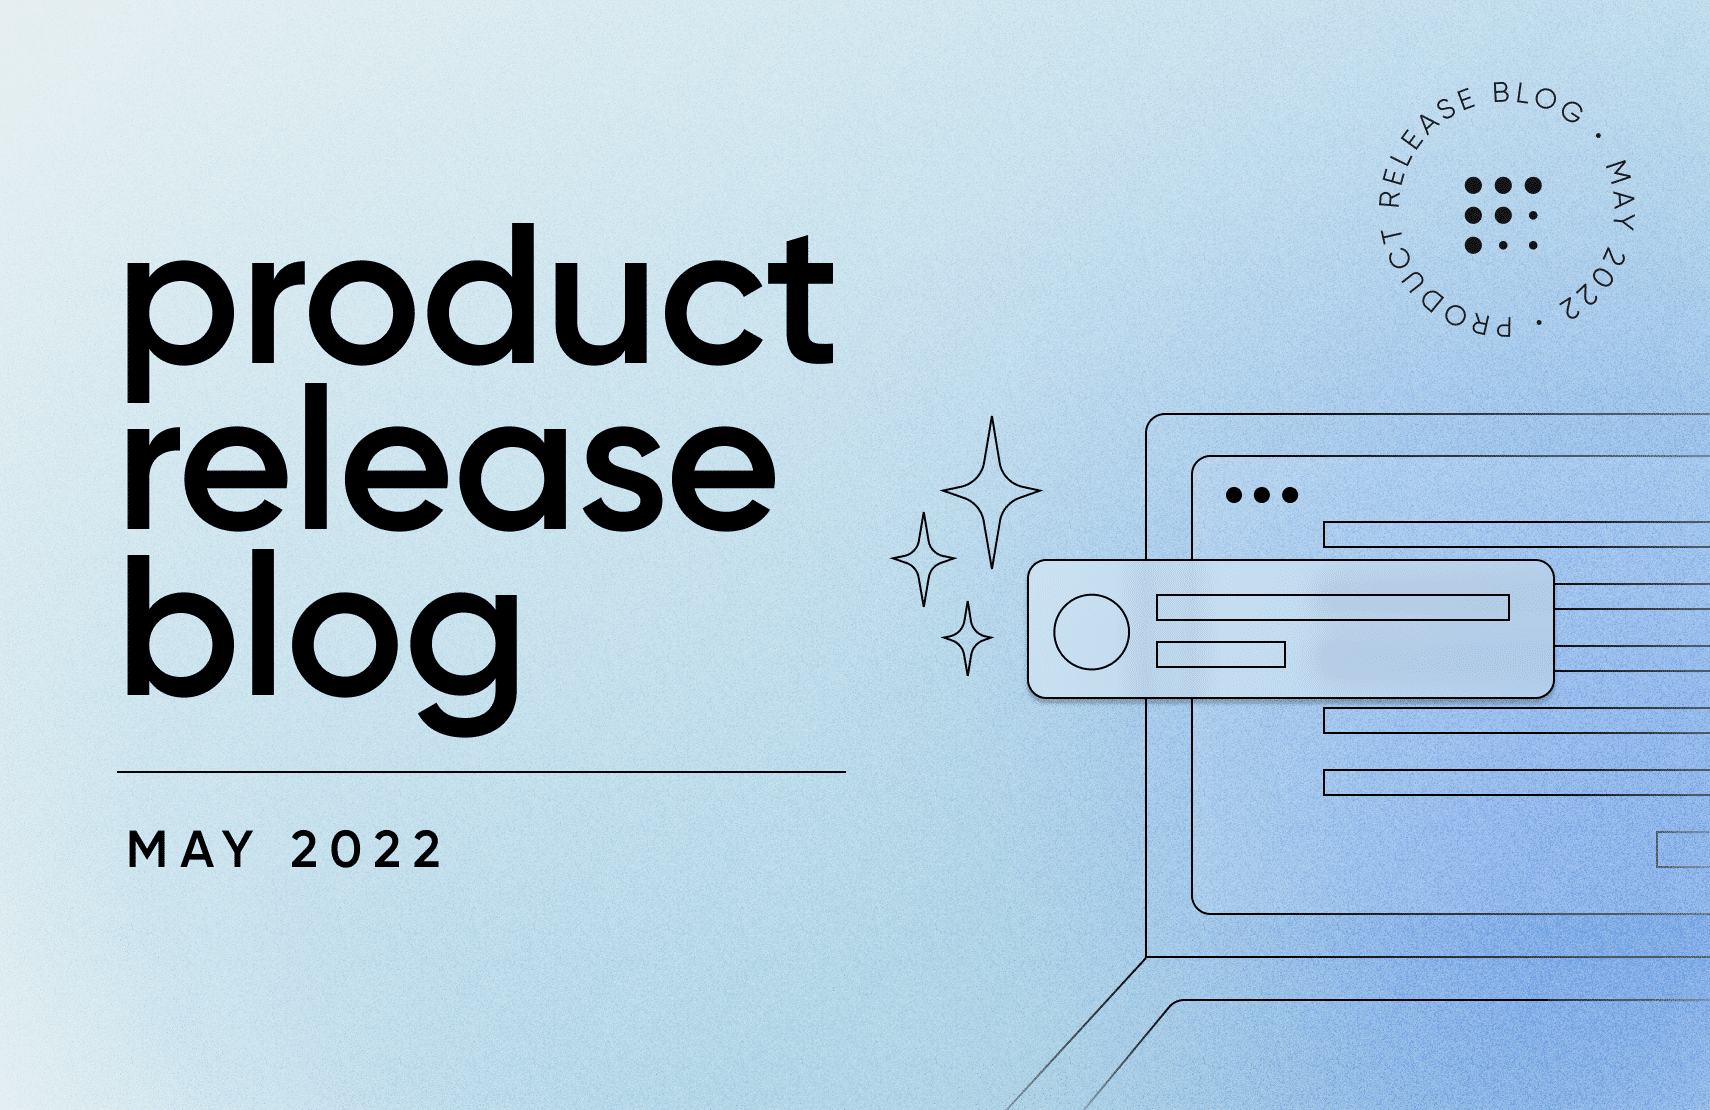 This product release covers updates on fabric XM, fabric. Marketplace, fabric Offers, and search.